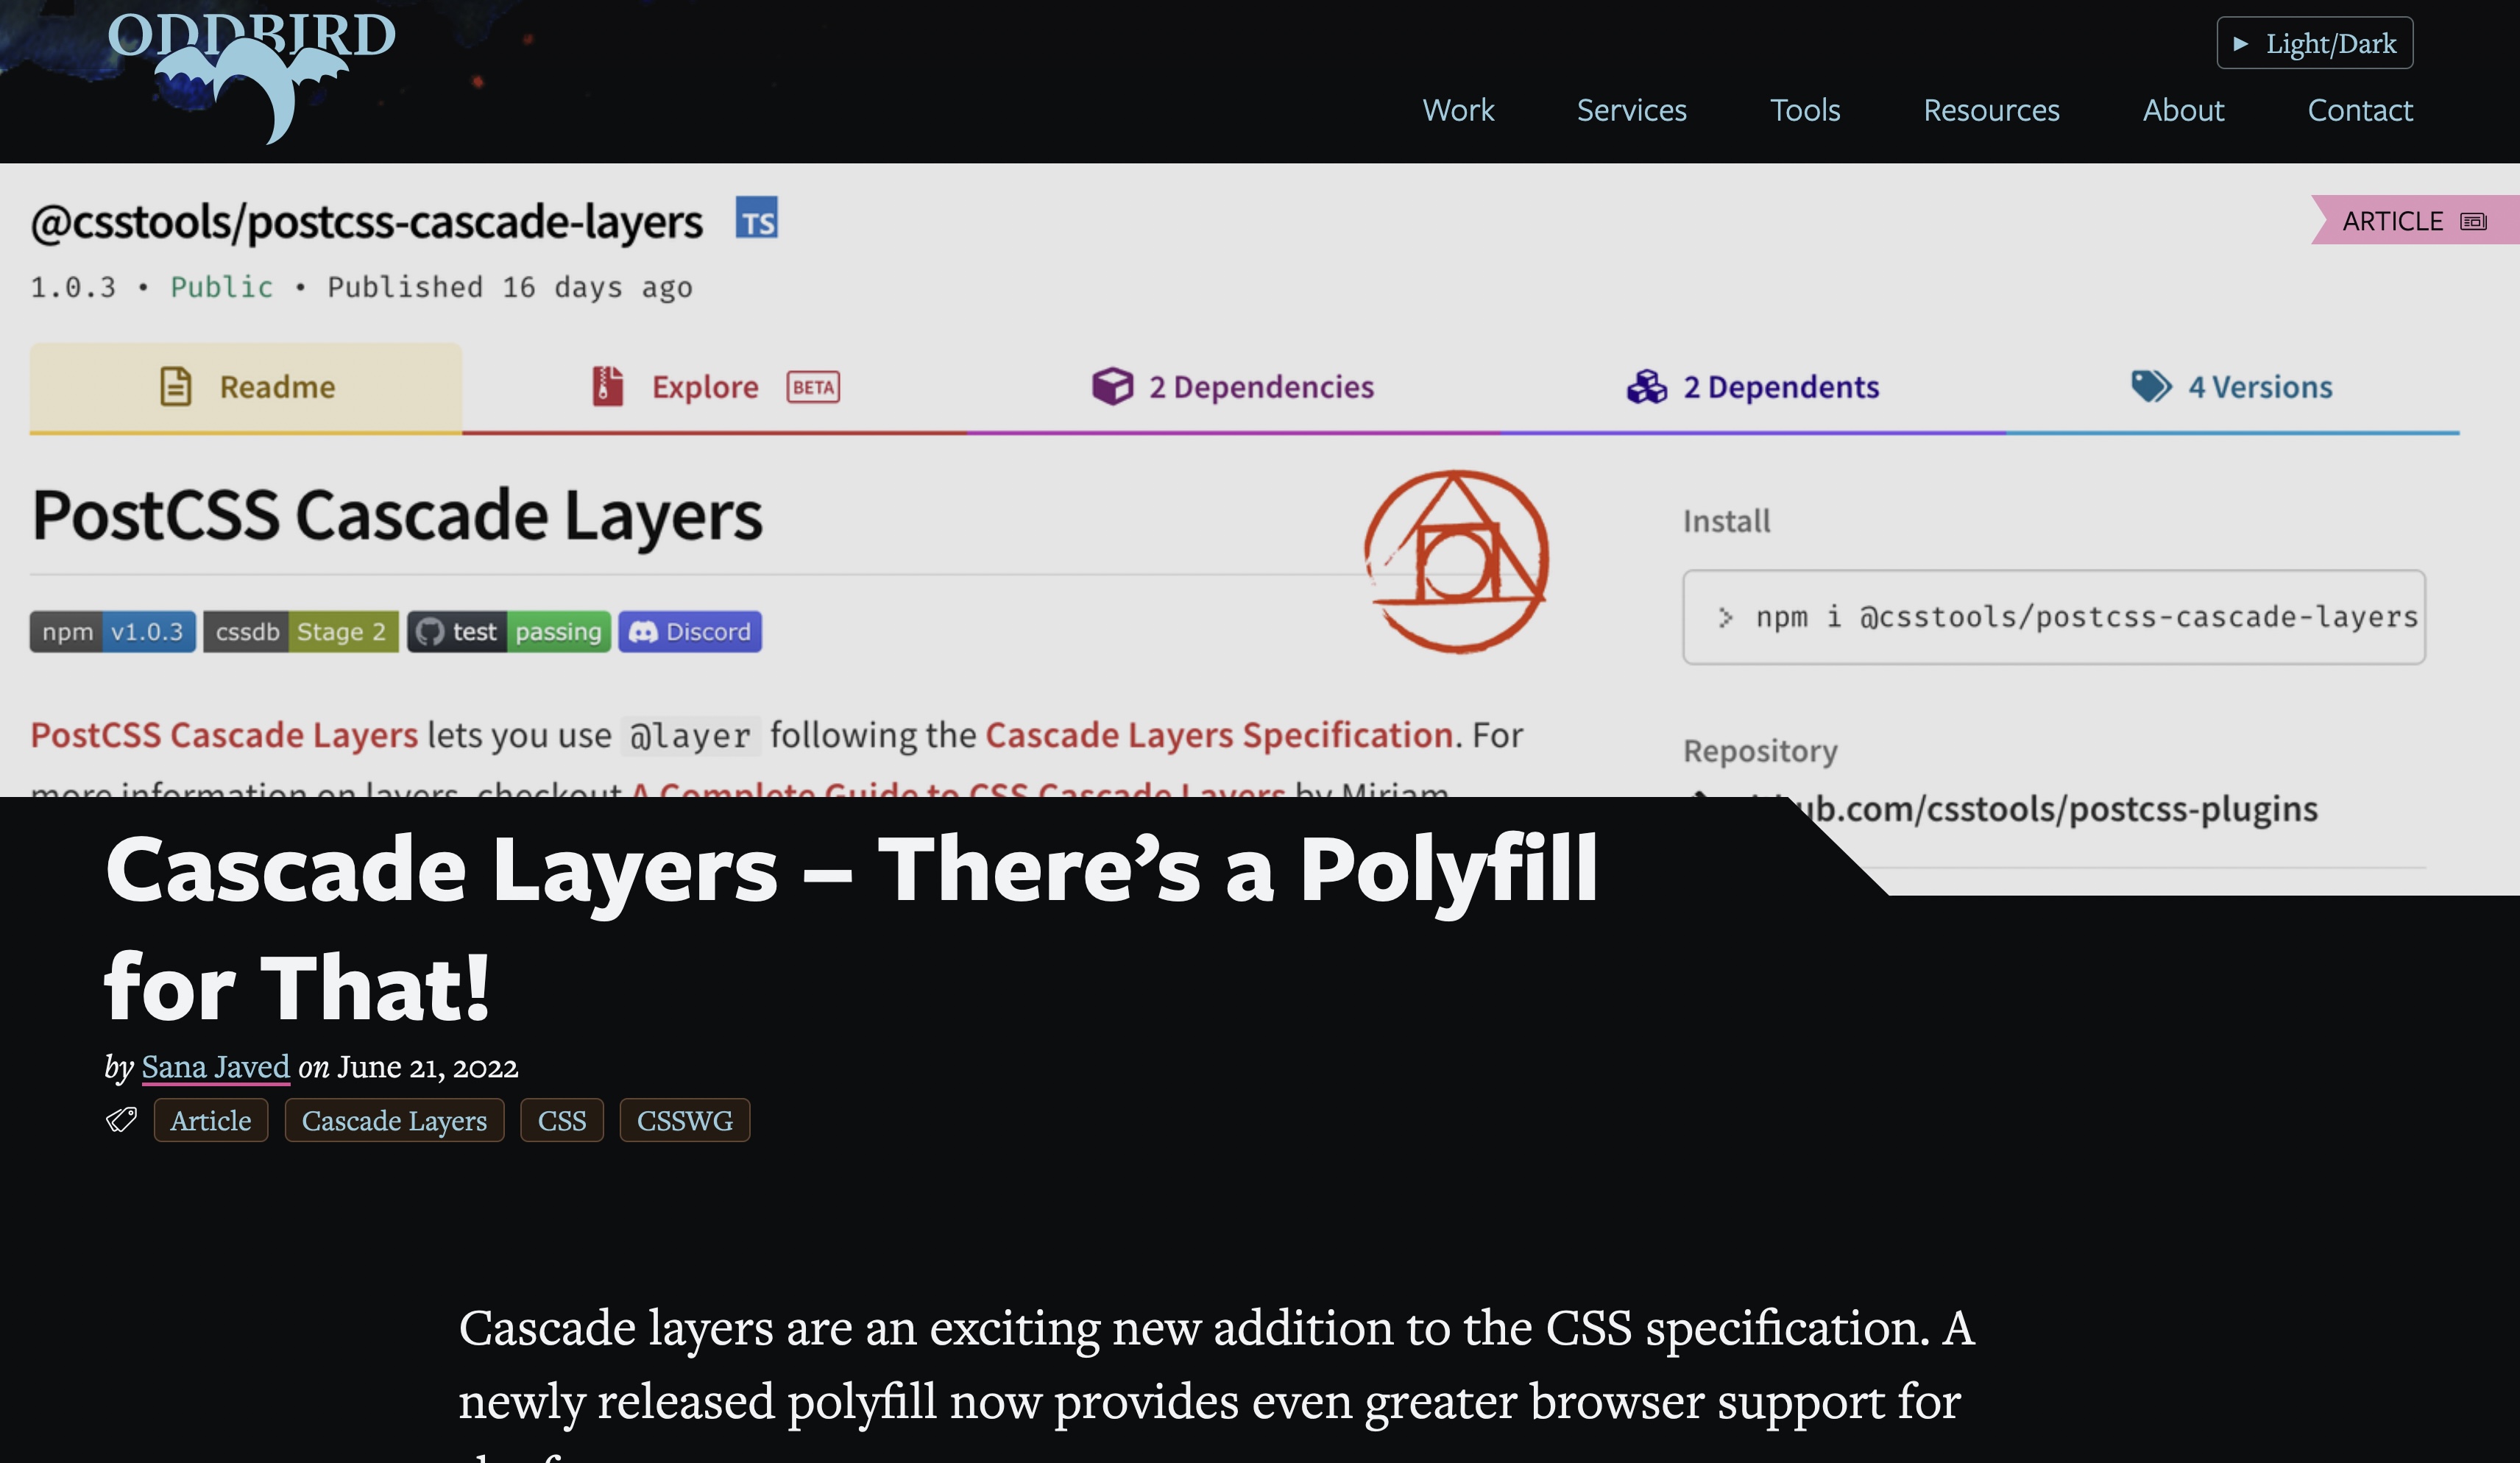 OddBird article, Cascade Layers – There’s a Polyfill for That! by Sana Javed on June 21, 2022